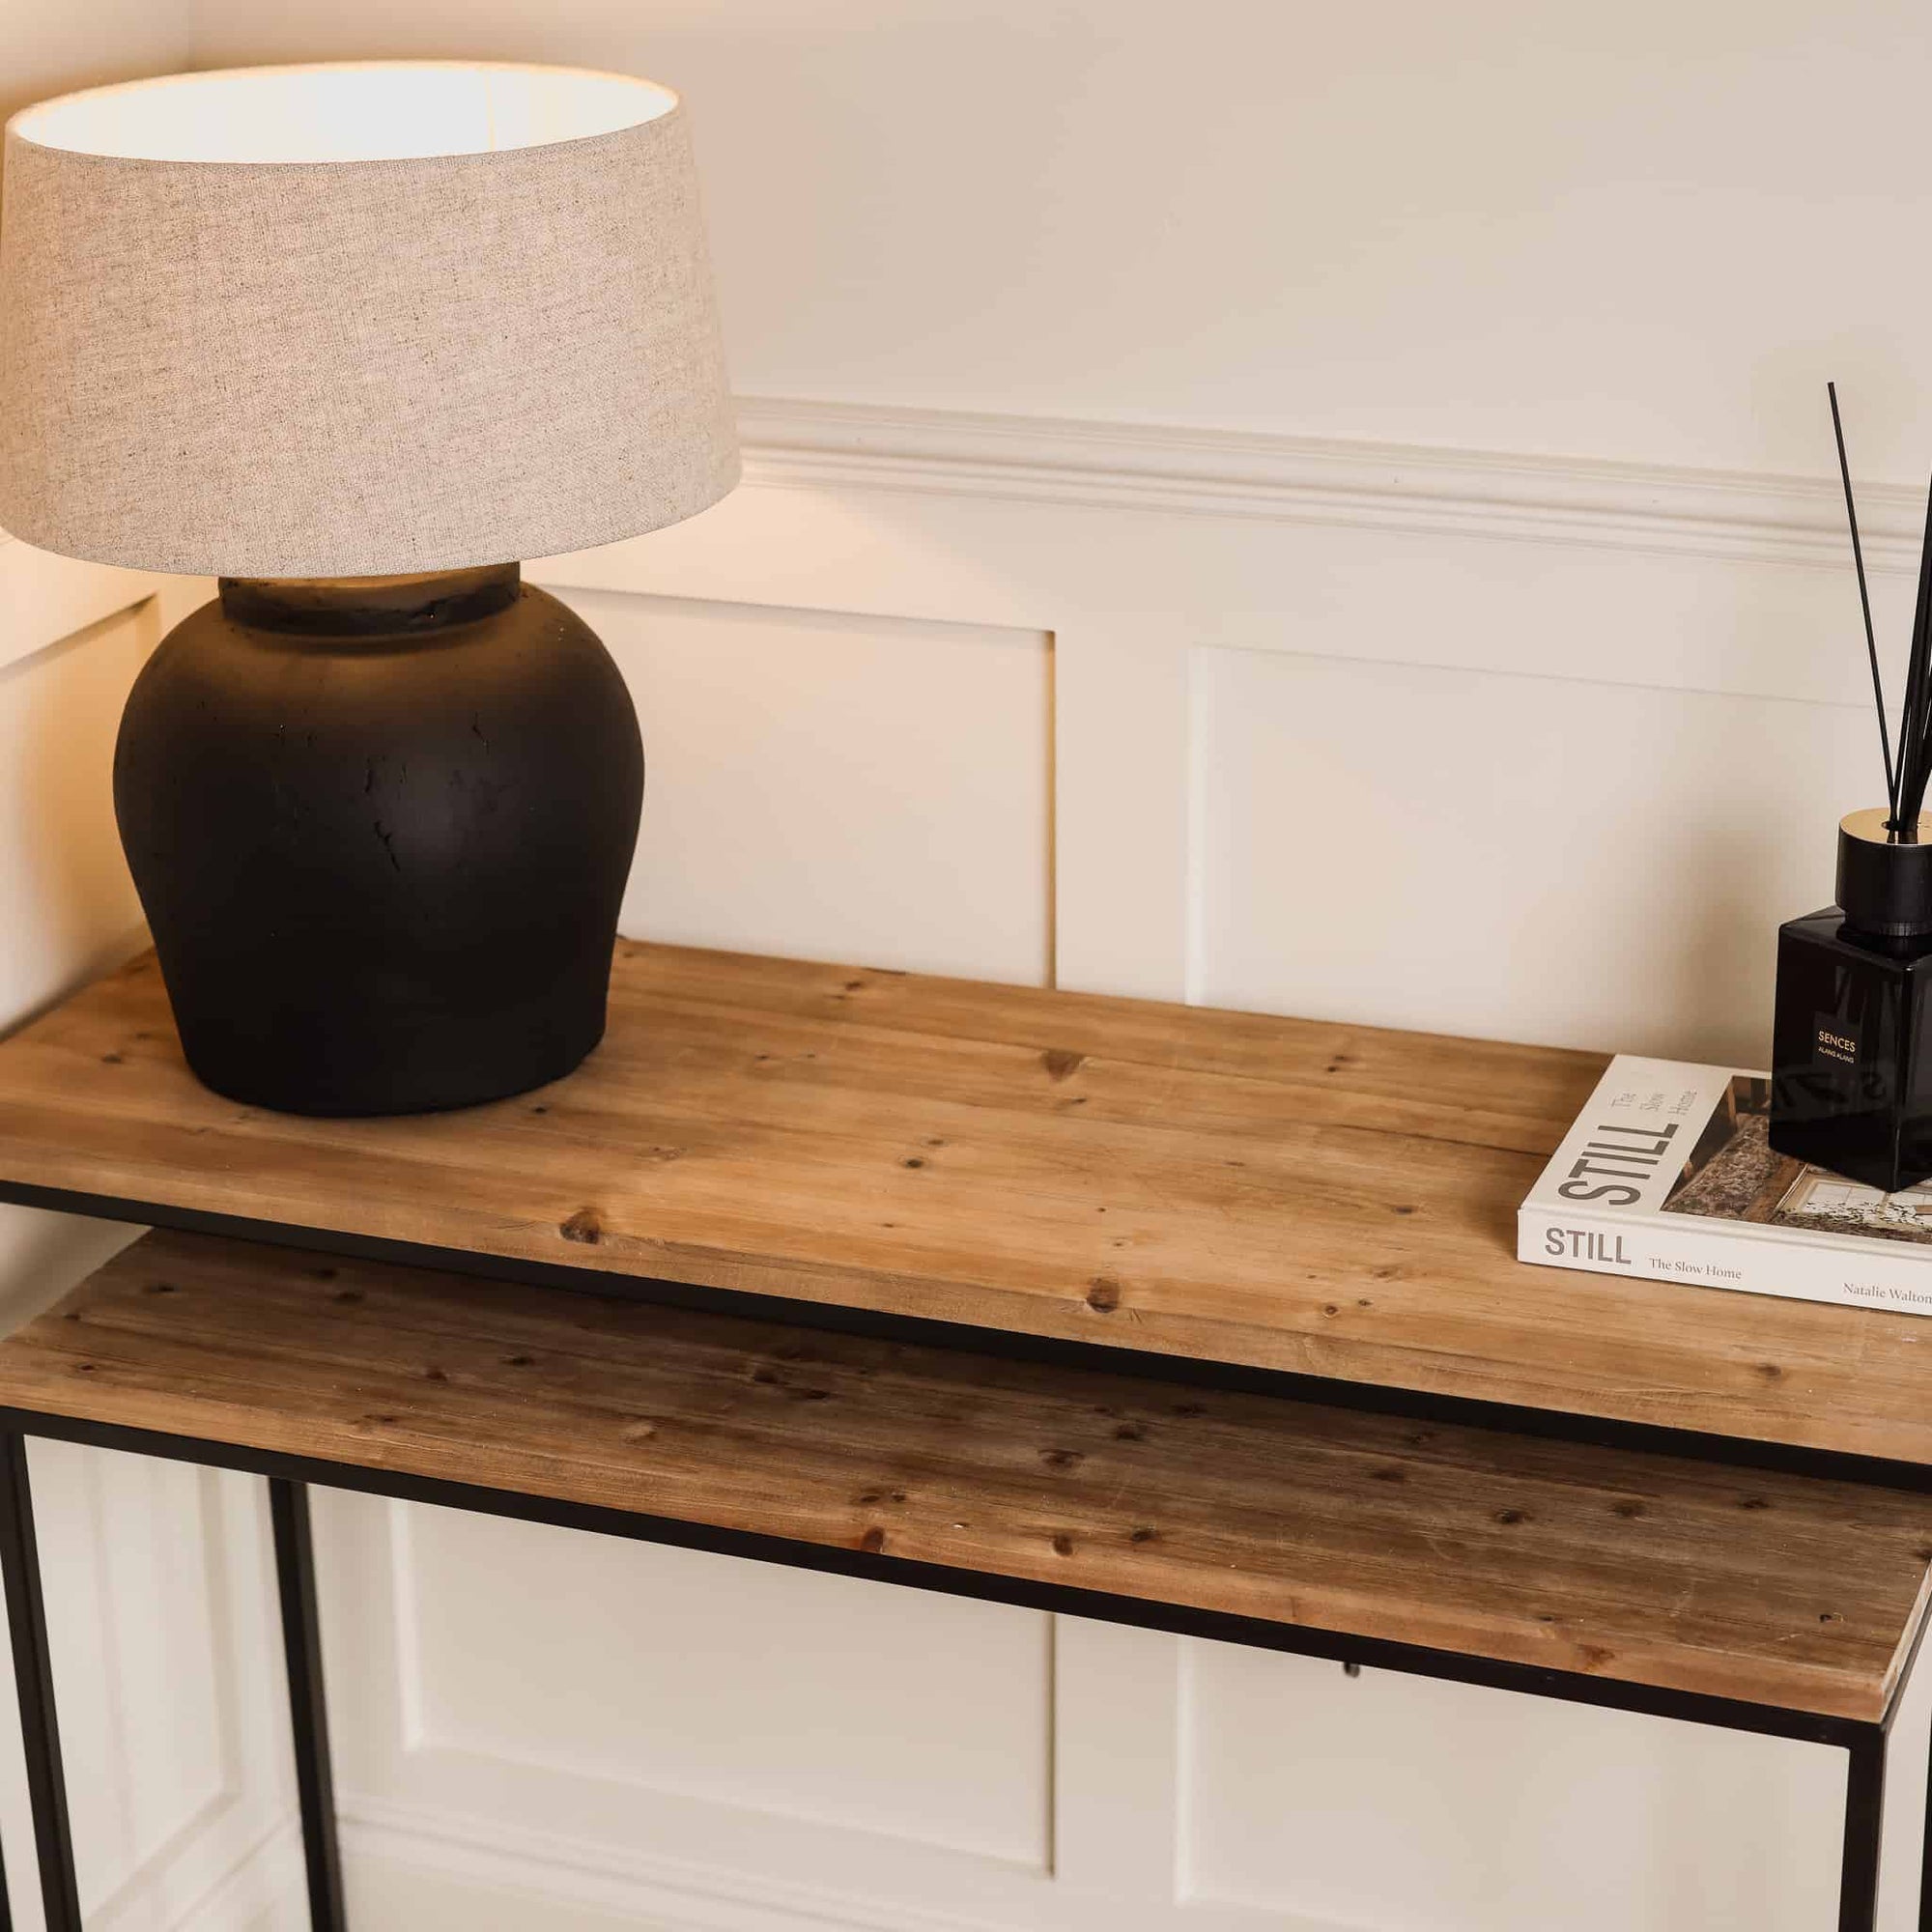 Two wooden nest console tables with switched on lamp, white book and black diffuser from above view.